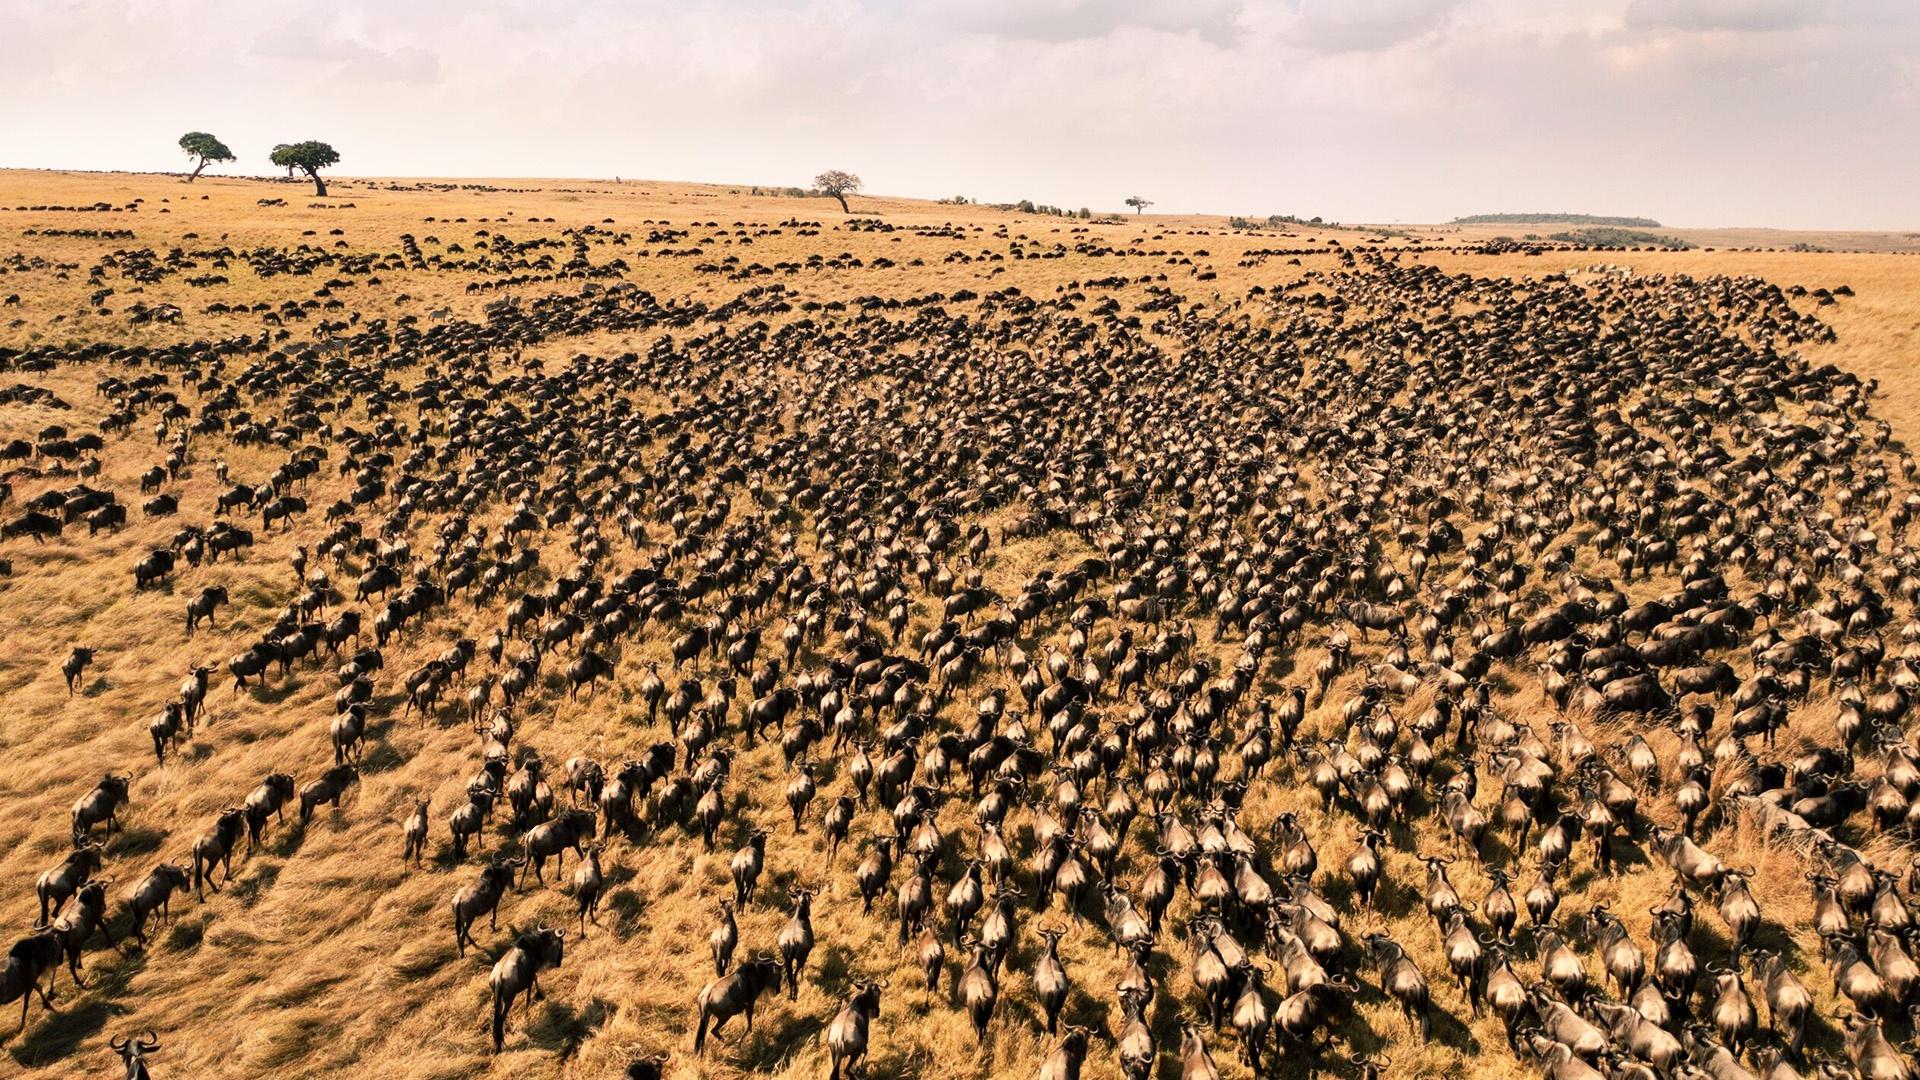 An aerial view of Wildebeests from NATURE Season 41